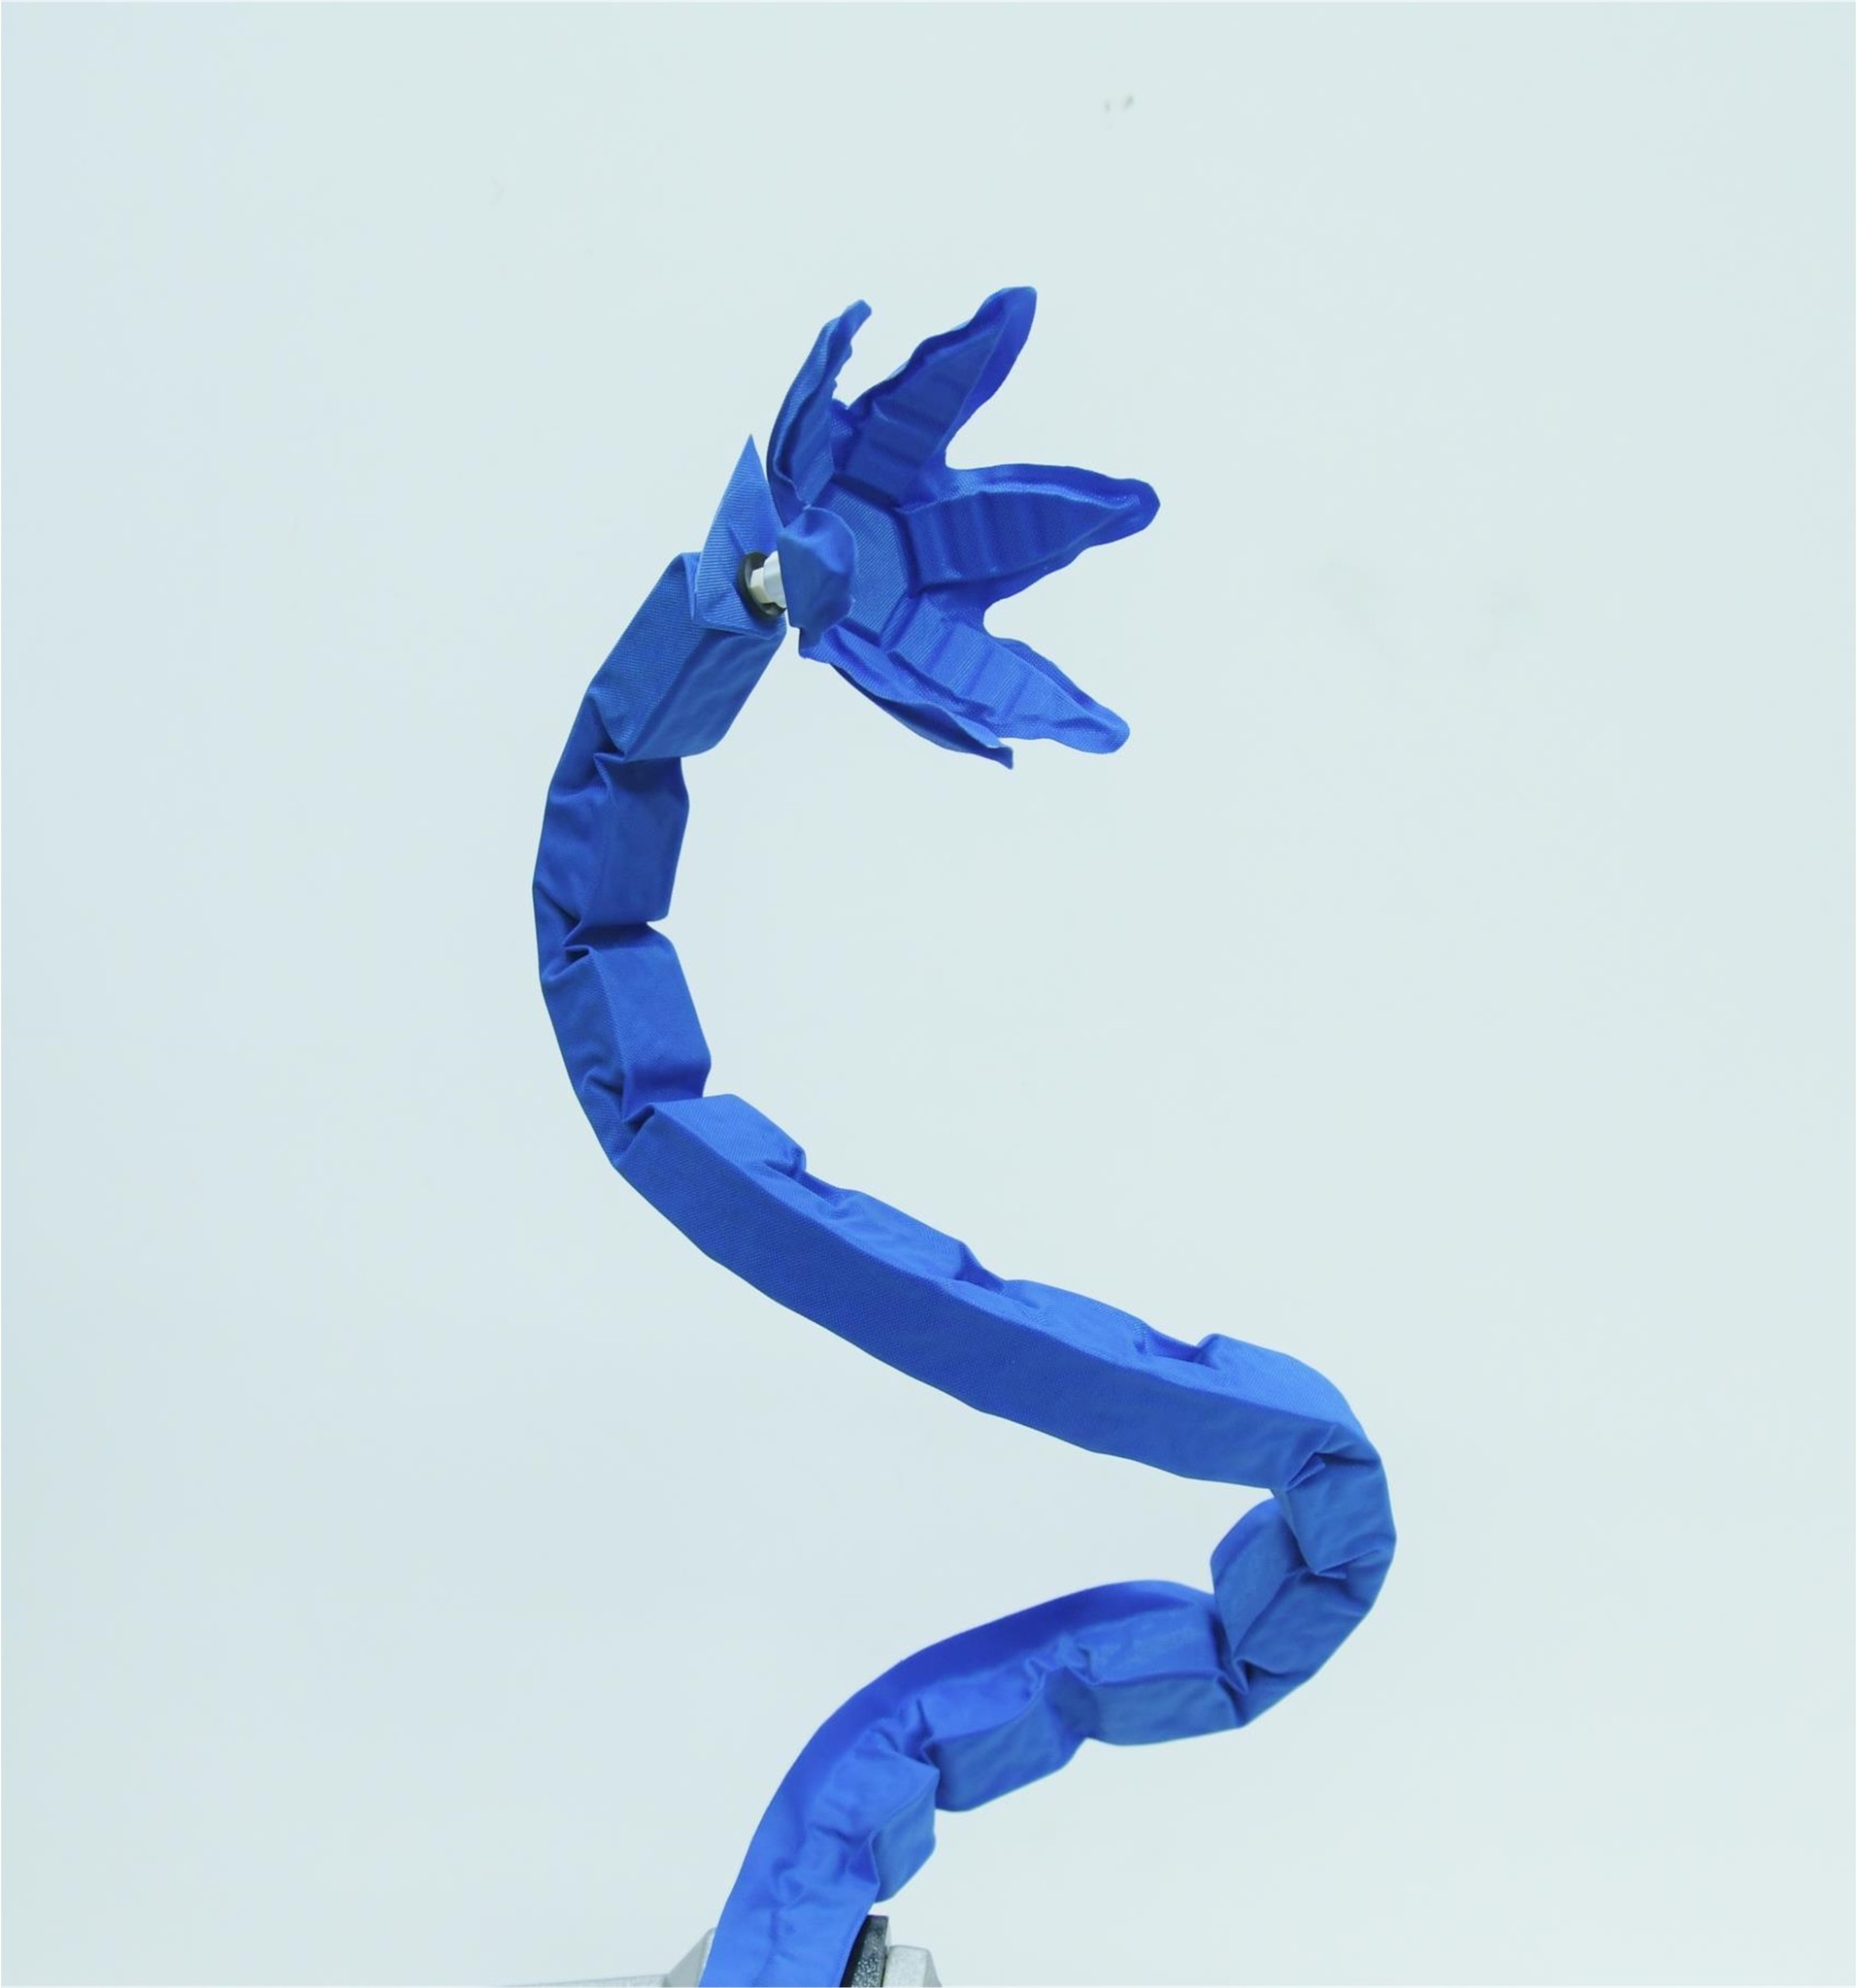   Artificial muscle similar to a snake 